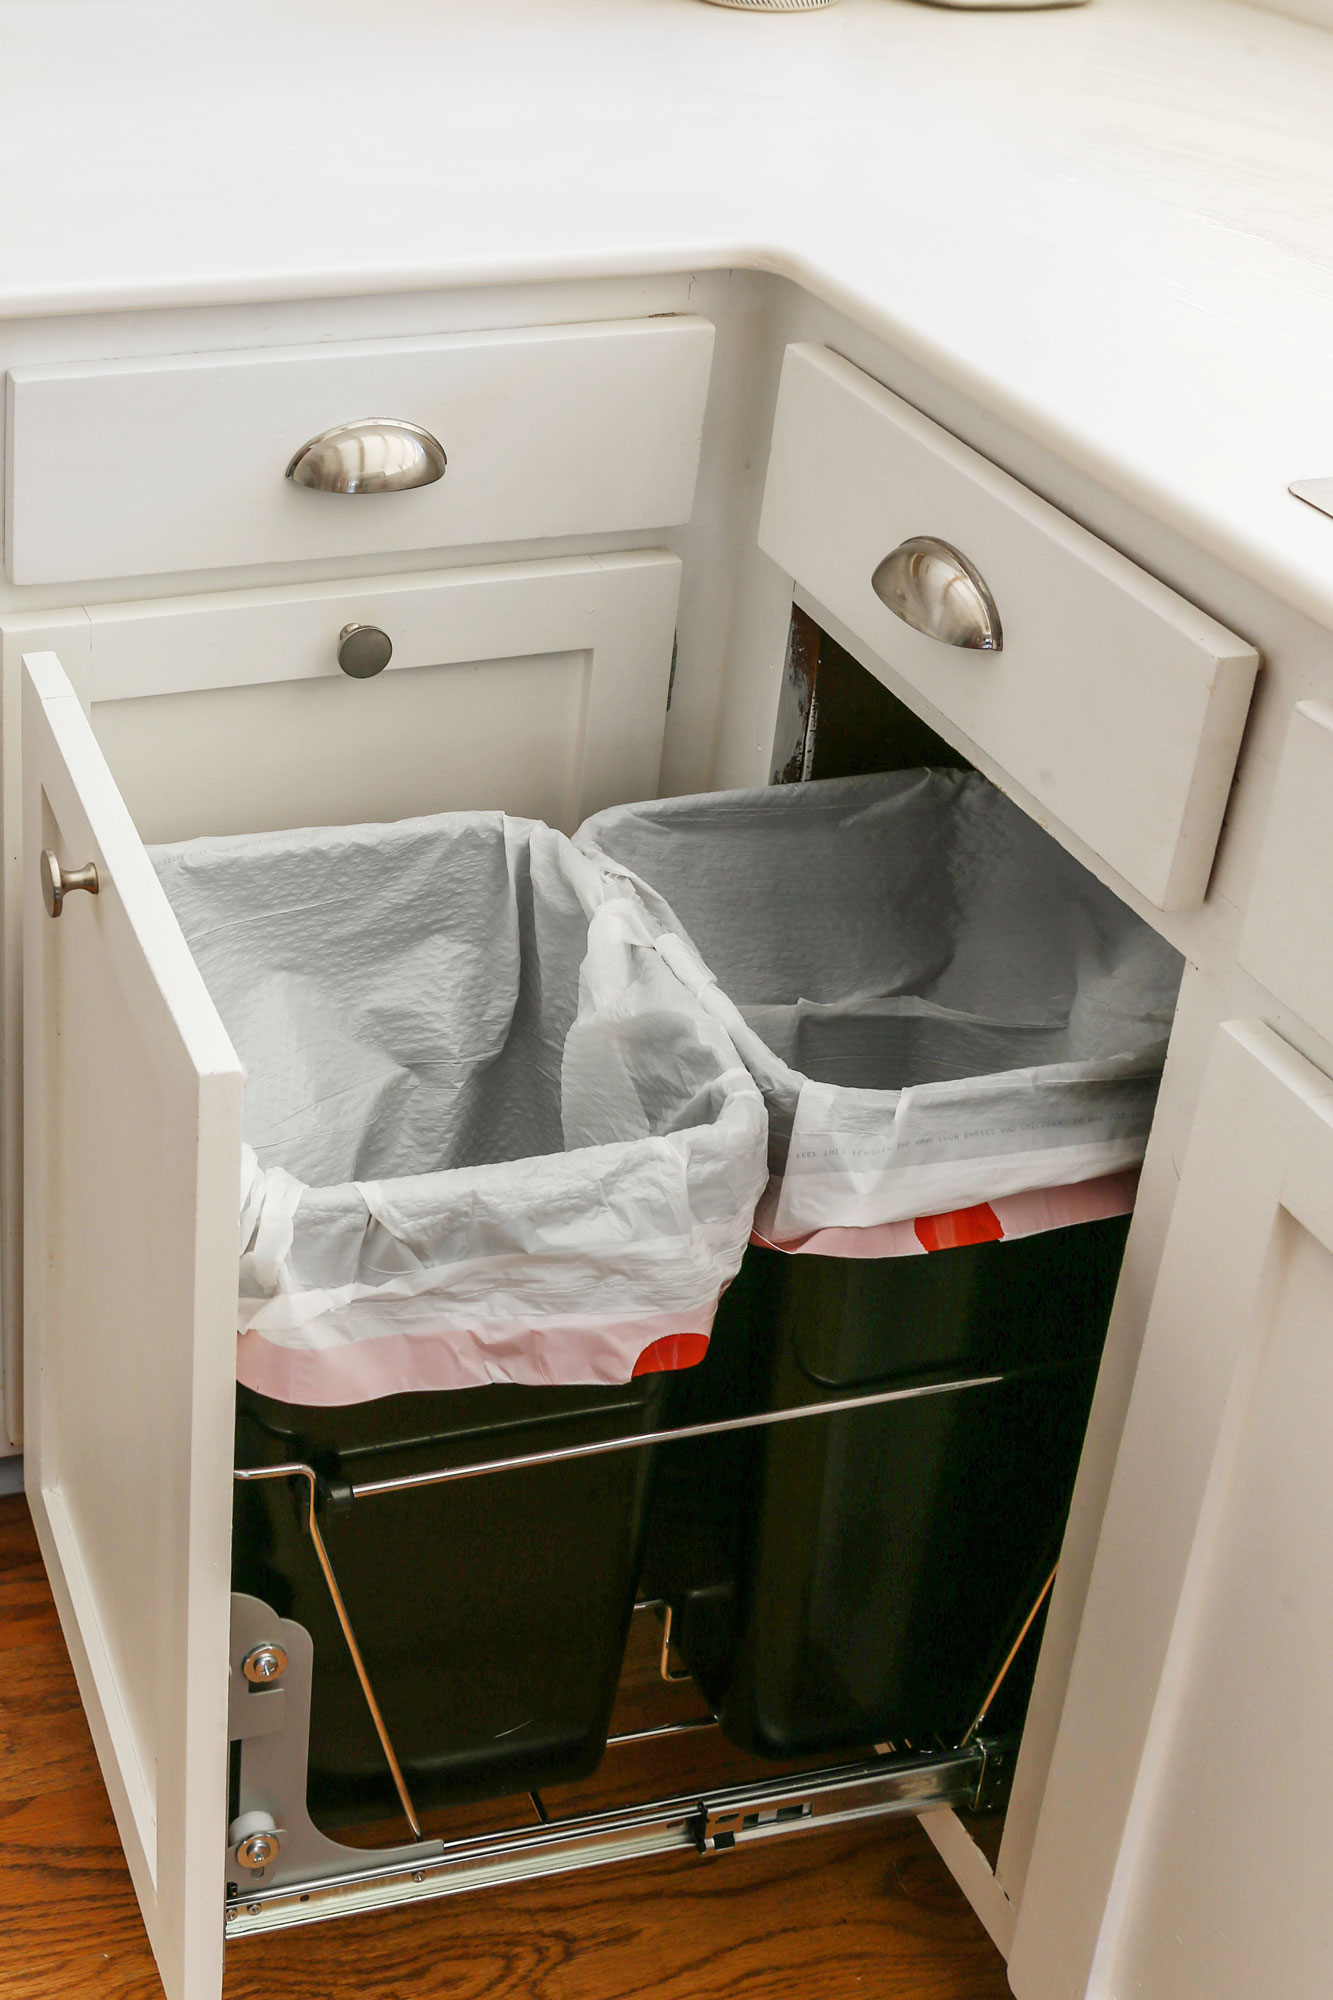 https://designingvibes.com/wp-content/uploads/2022/09/how-to-builld-trash-can-cabinet-6.jpg